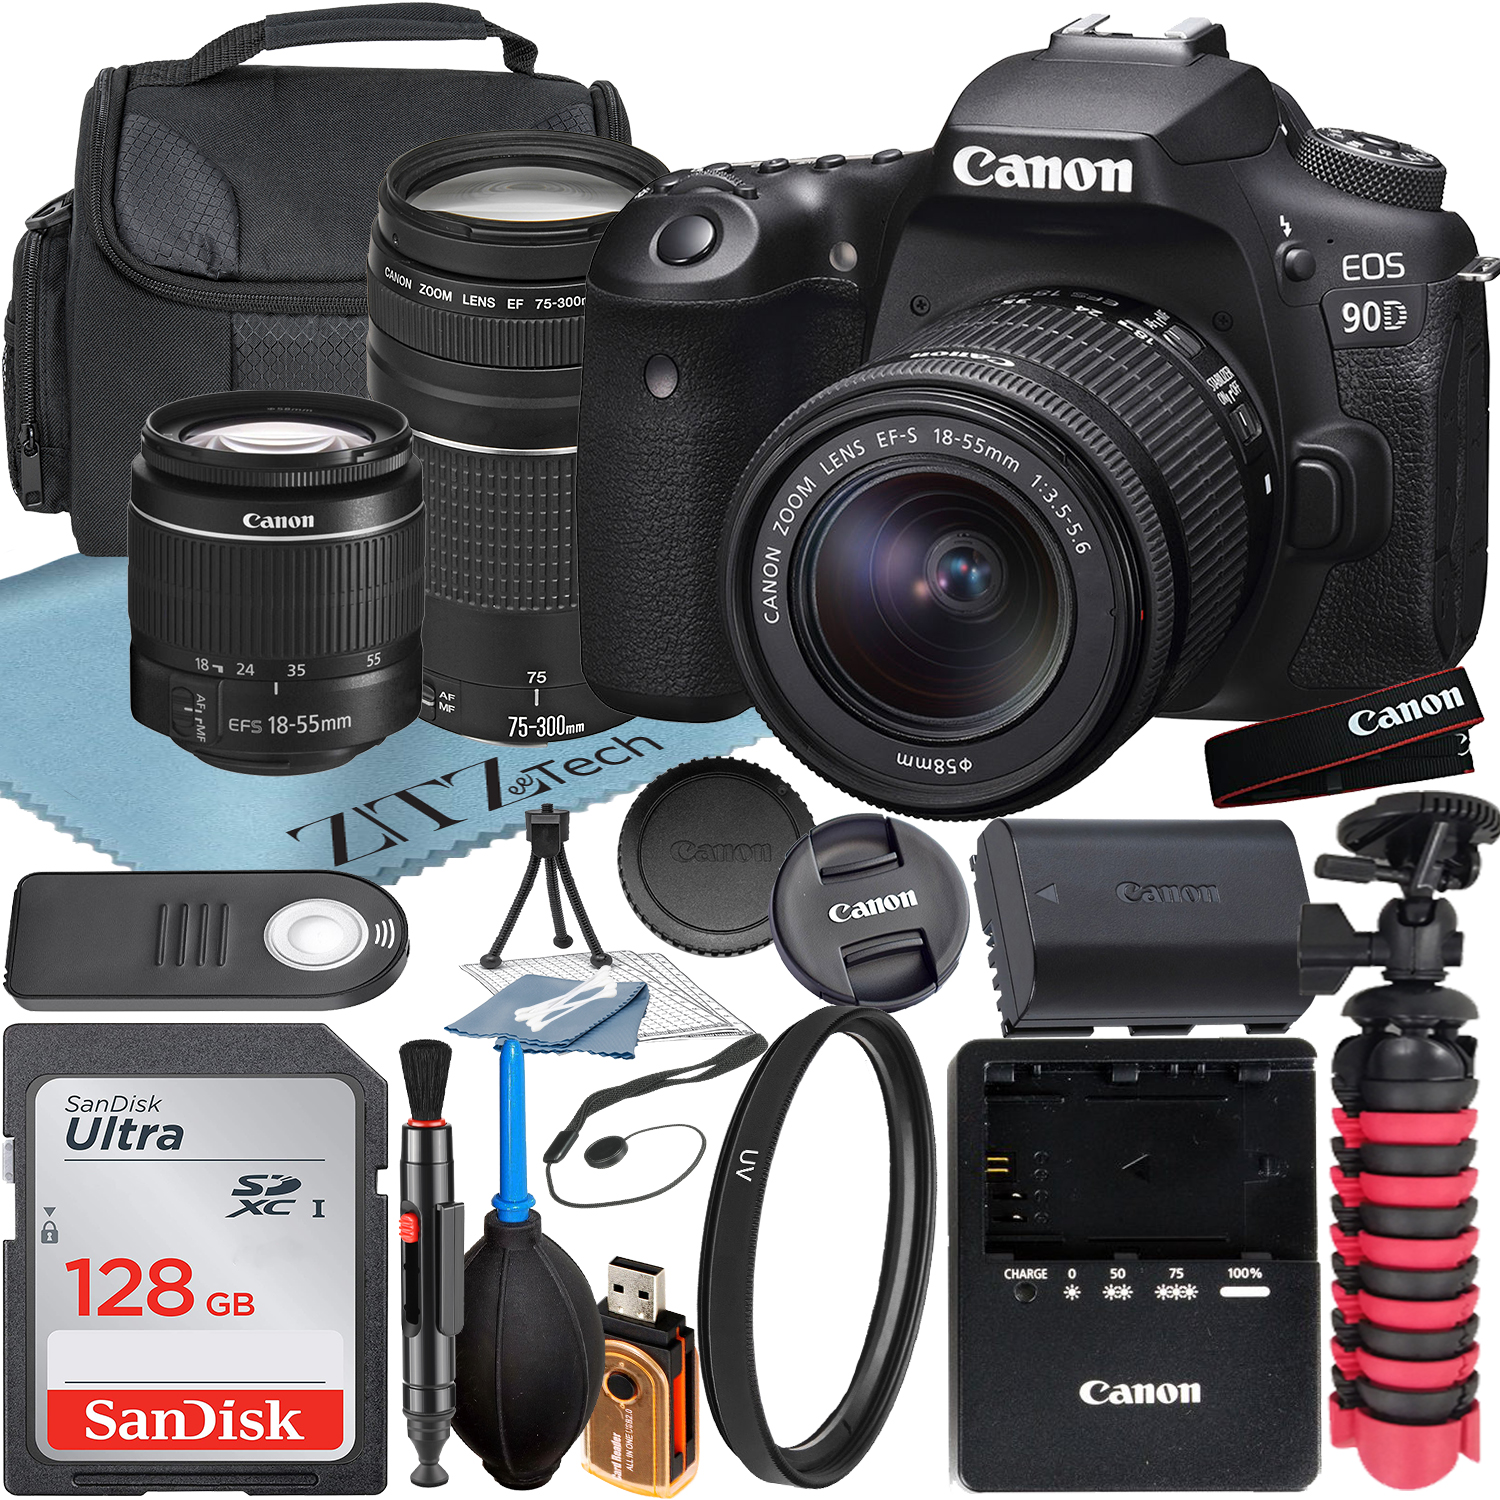 Canon EOS 90D DSLR Camera with 18-55mm + 75-300mm Lens + SanDisk 128GB Memory Card + Case + UV Filter + ZeeTech Accessory Bundle